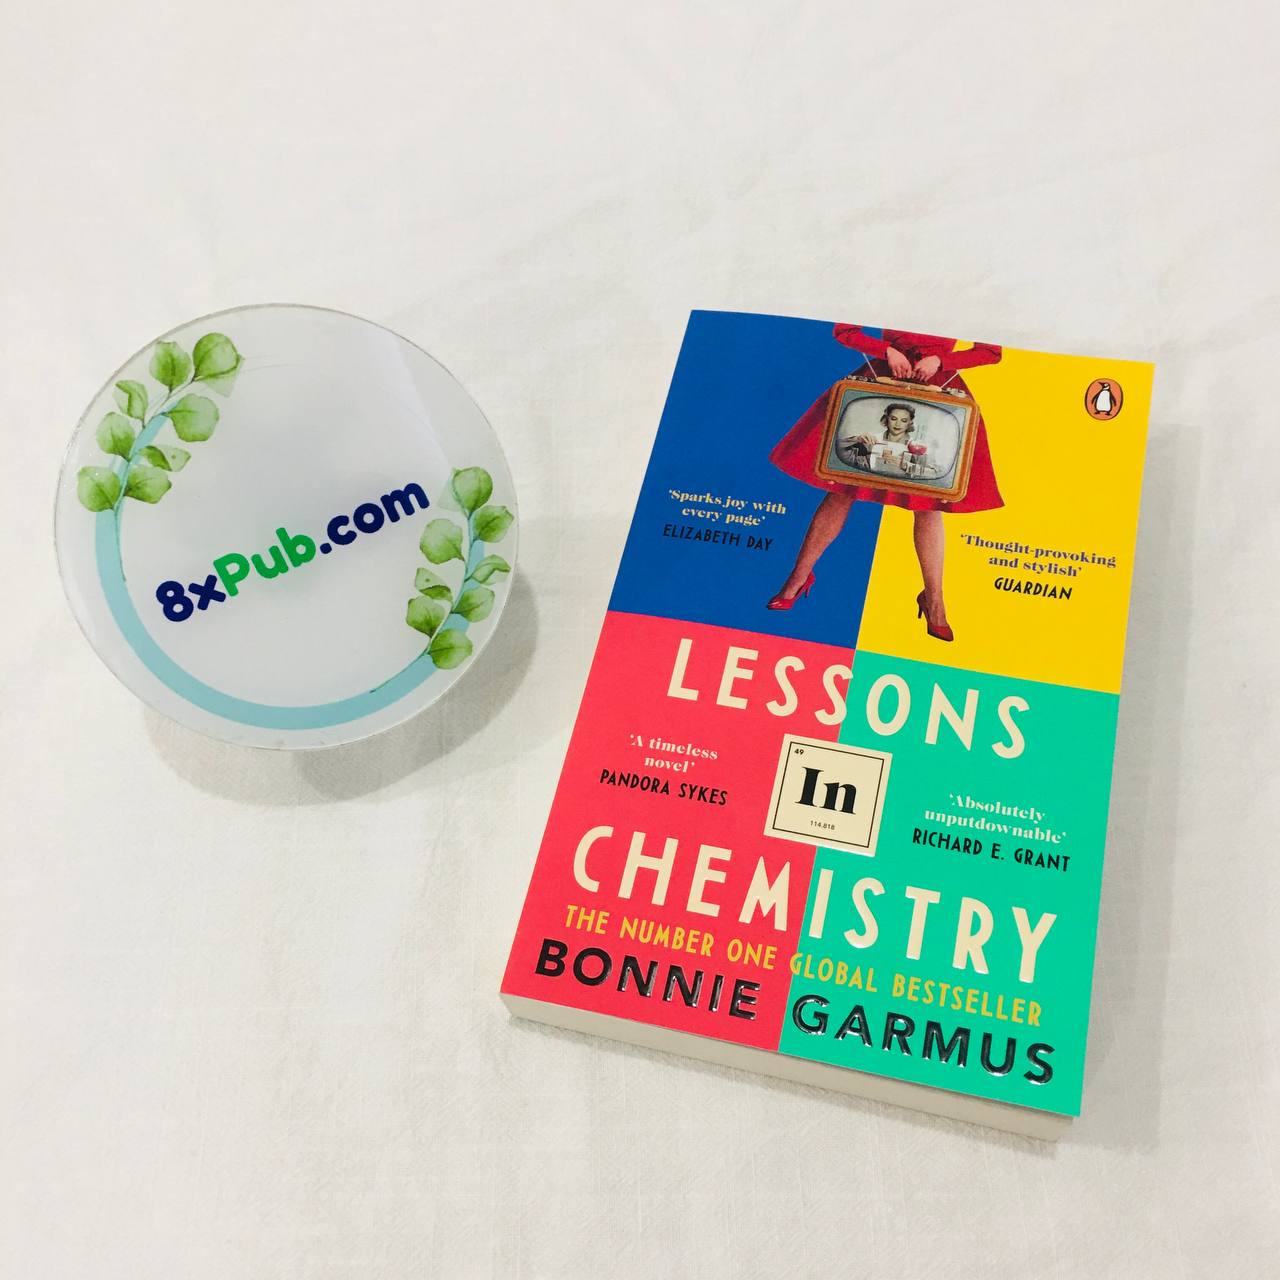 Book - Lessons in Chemistry by Bonnie Garmus